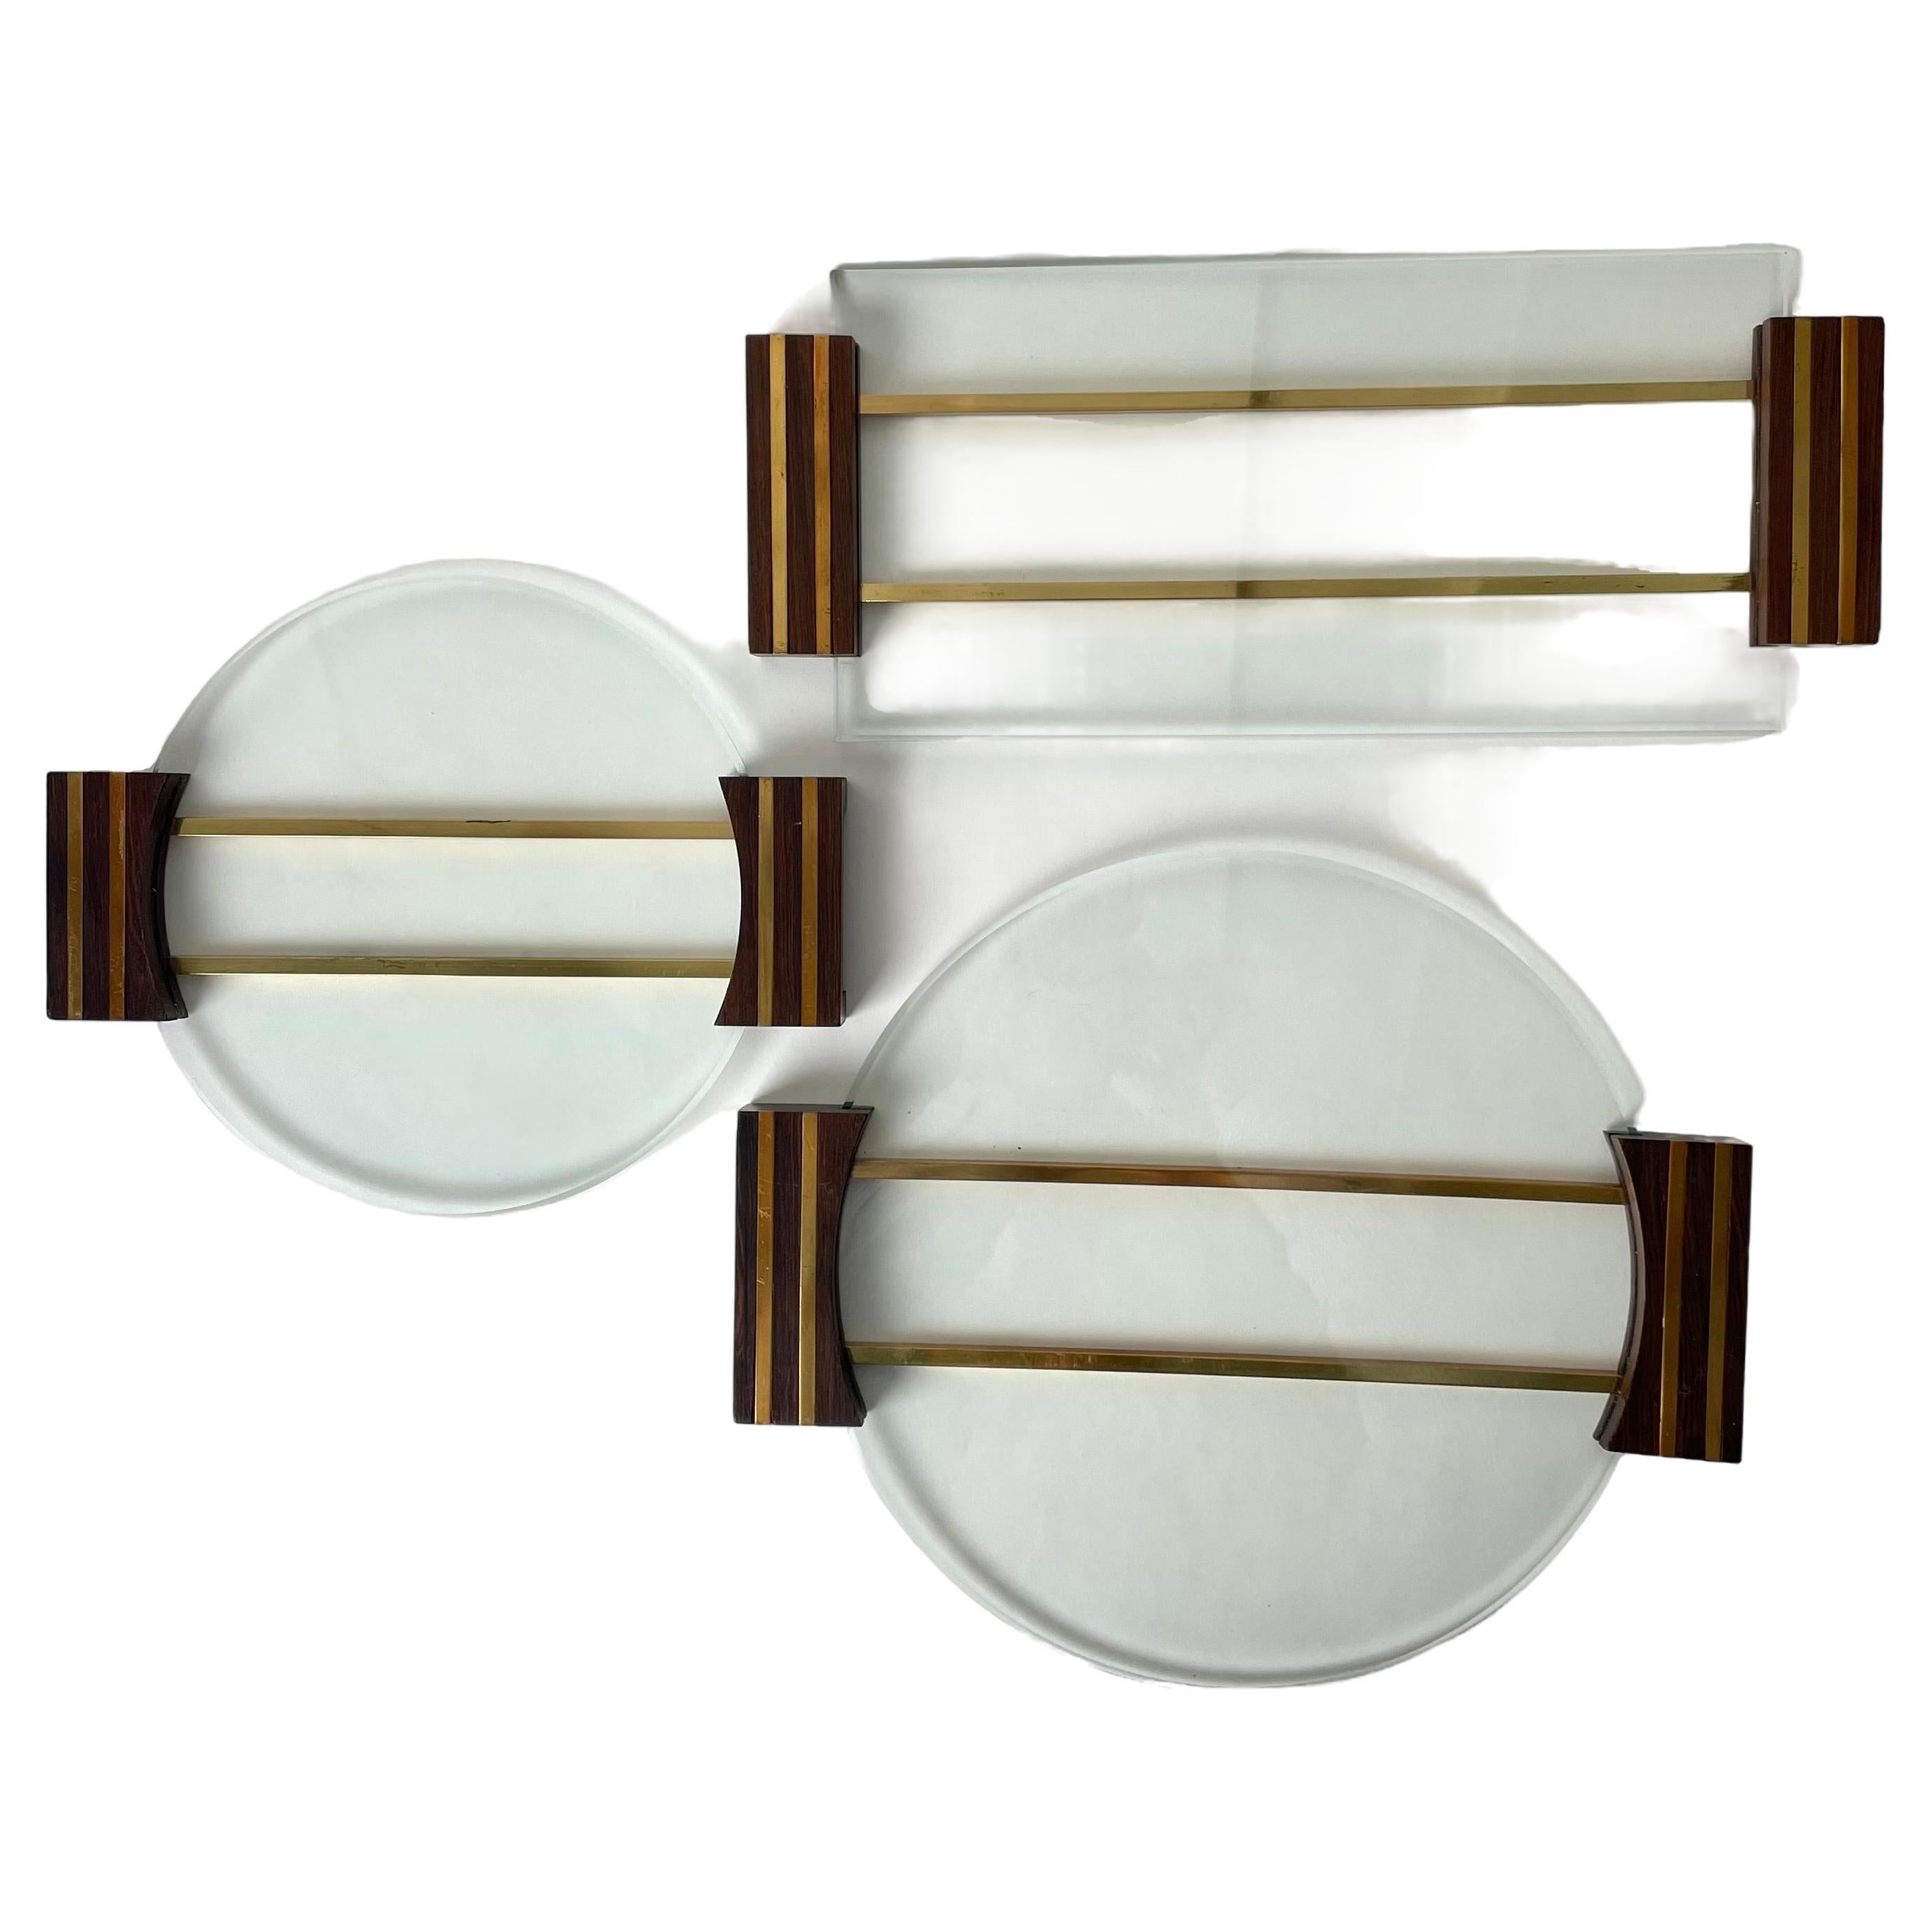 Elegant set of three Cheese Trays from the Mid-20th Century. Cool design in glass, brass and wood.

The cheese trays have the following dimensions:
31,5*27*2 cm
25,5*21*2 cm
35*15*2 cm

Wear consistent with age and use 